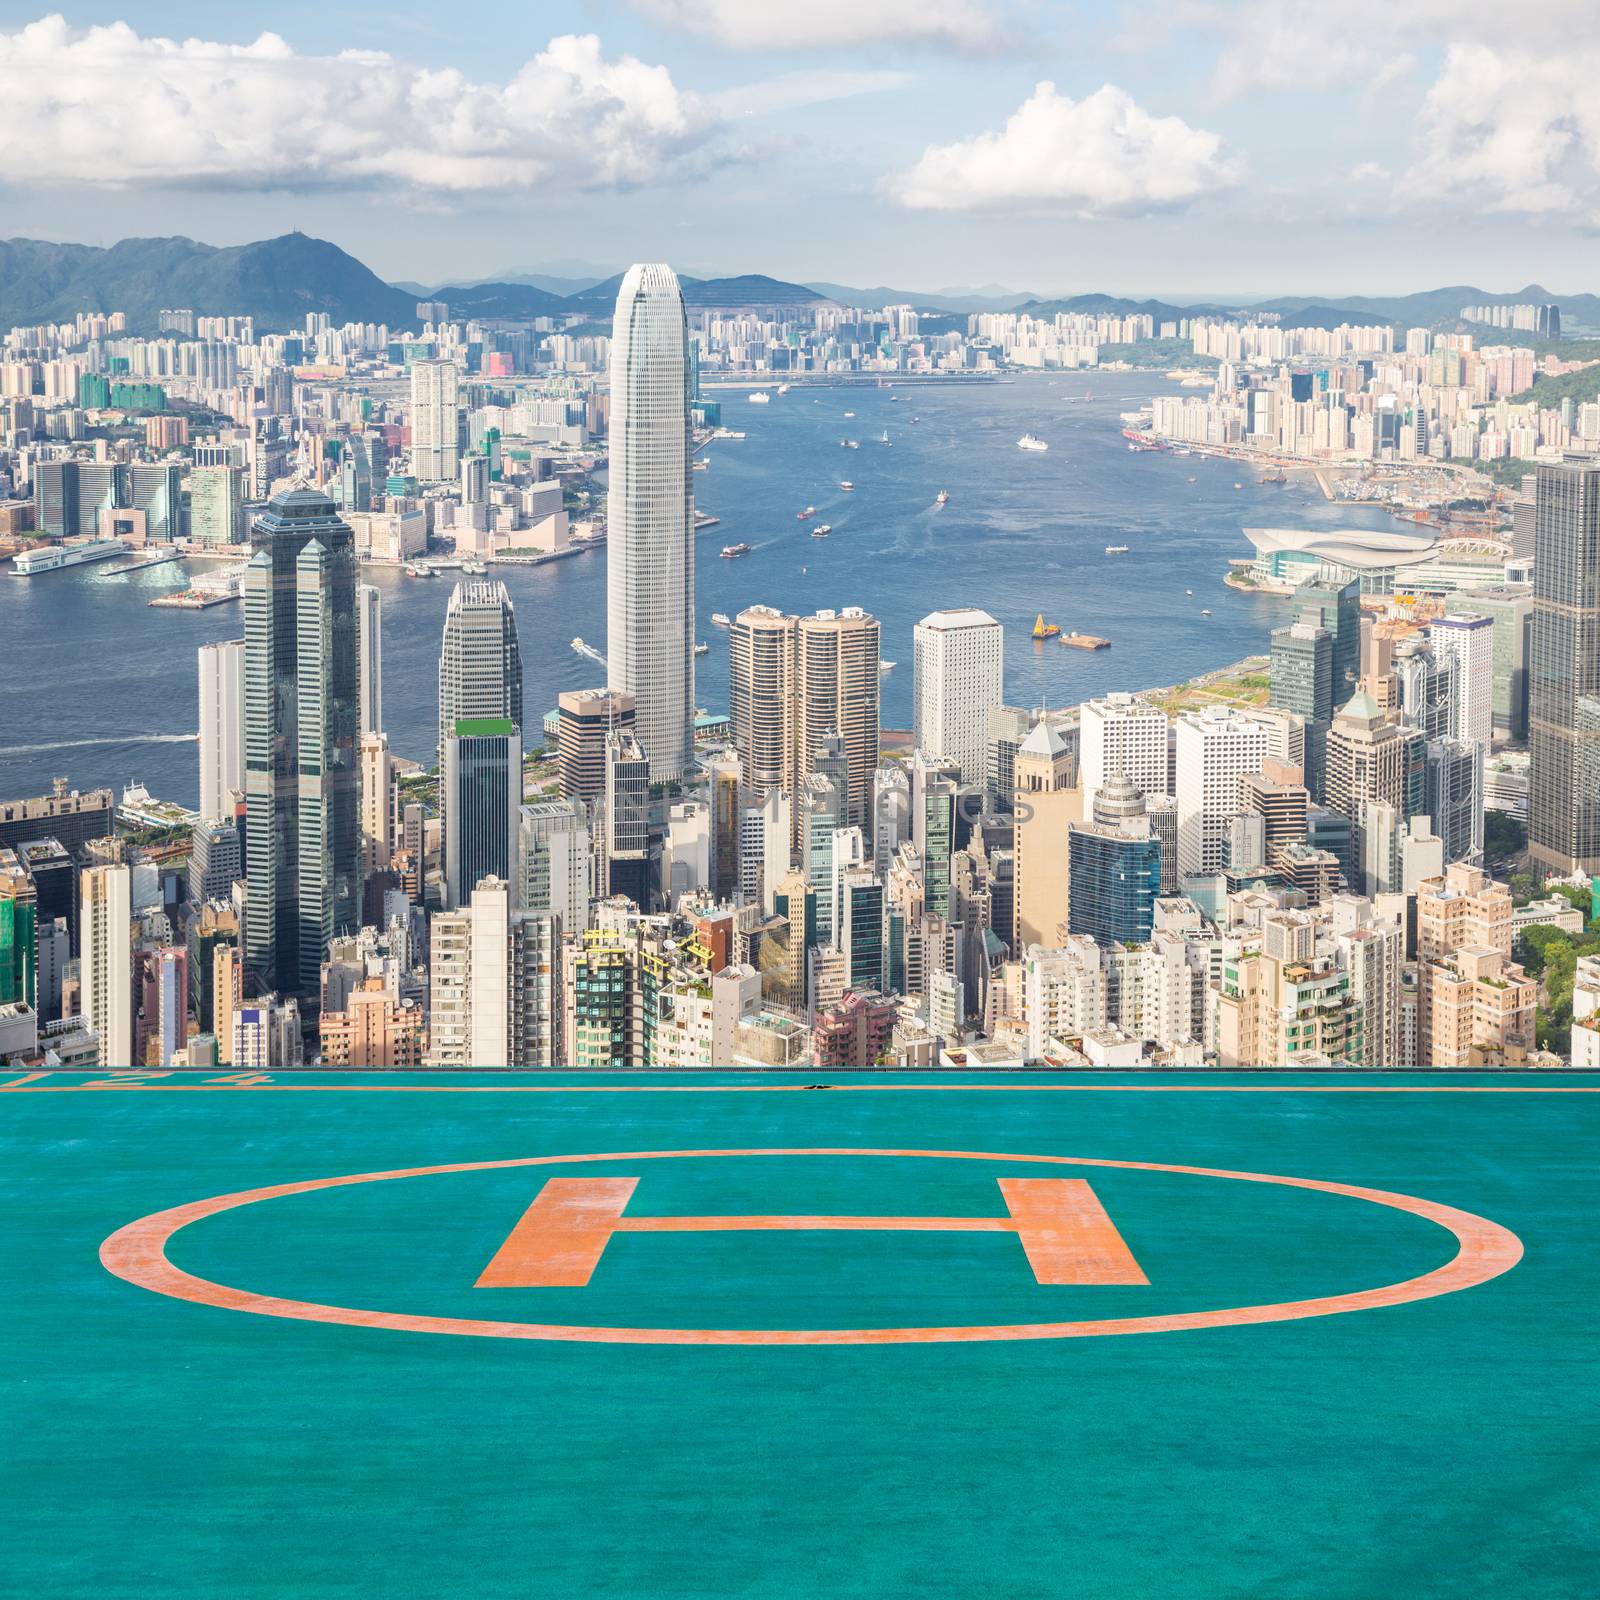 Hong Kong Skyline from Victoria Peak with helipad